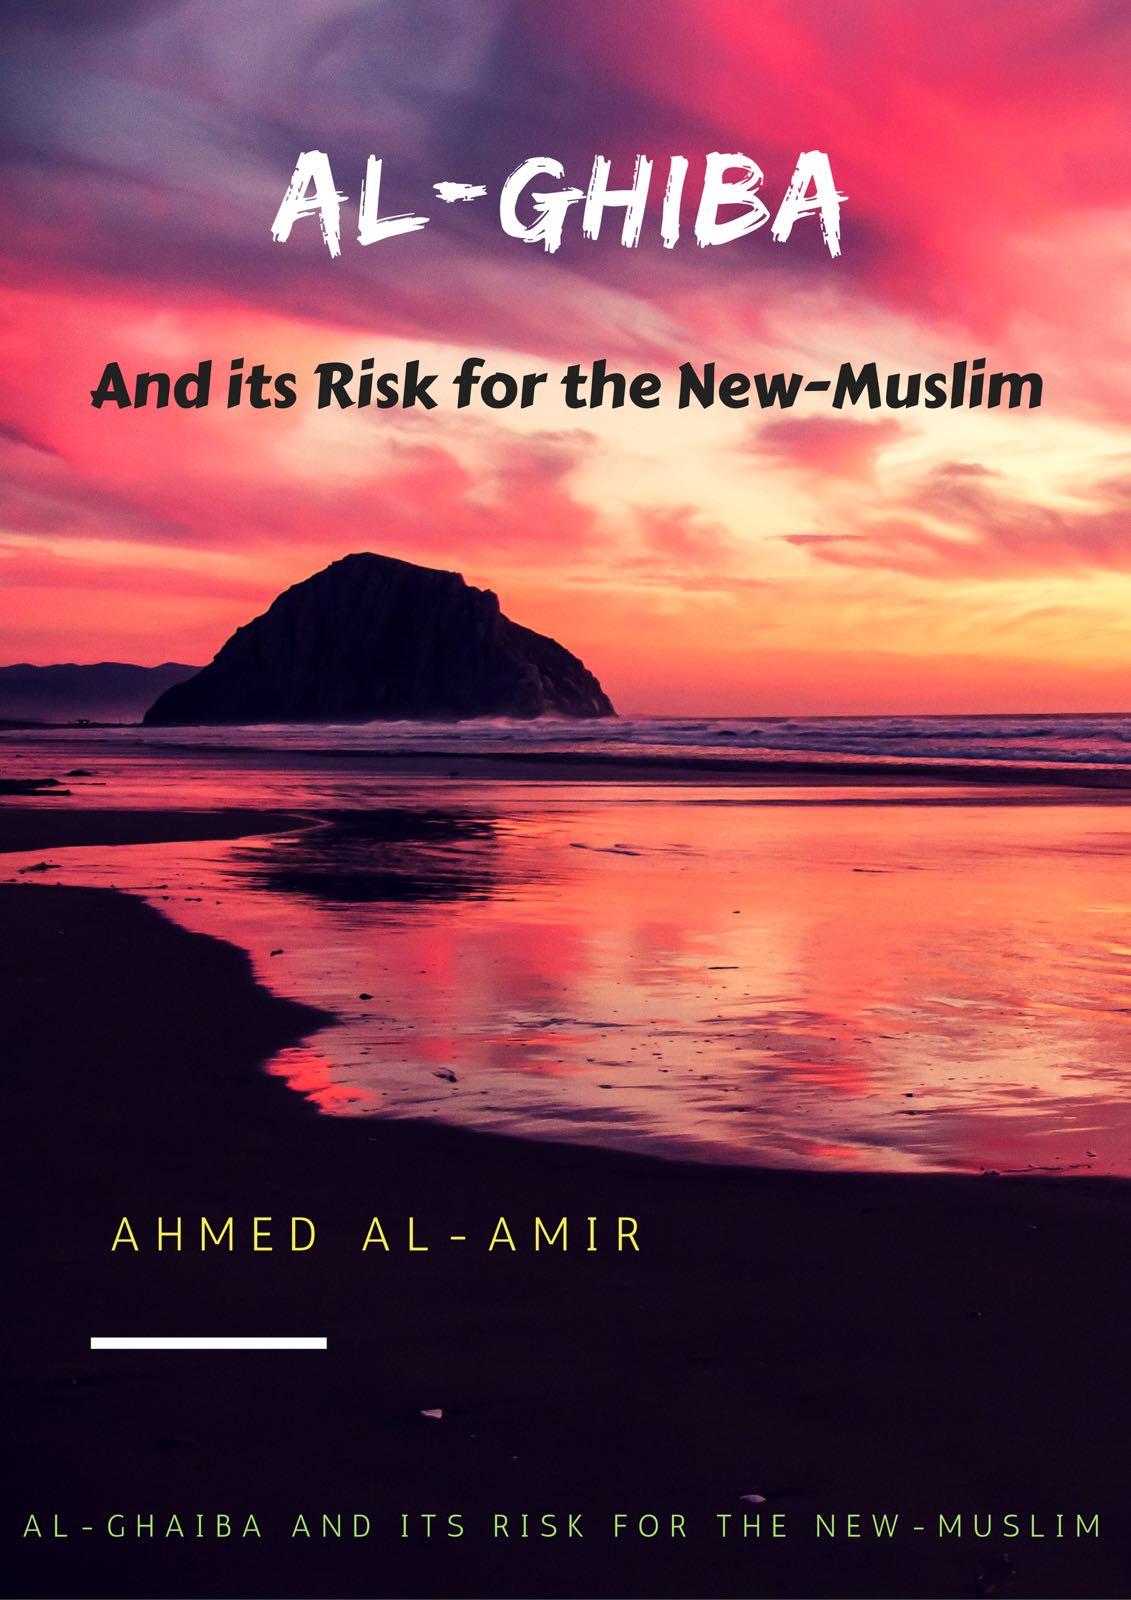 Backbiting (and its danger on the new Muslim)